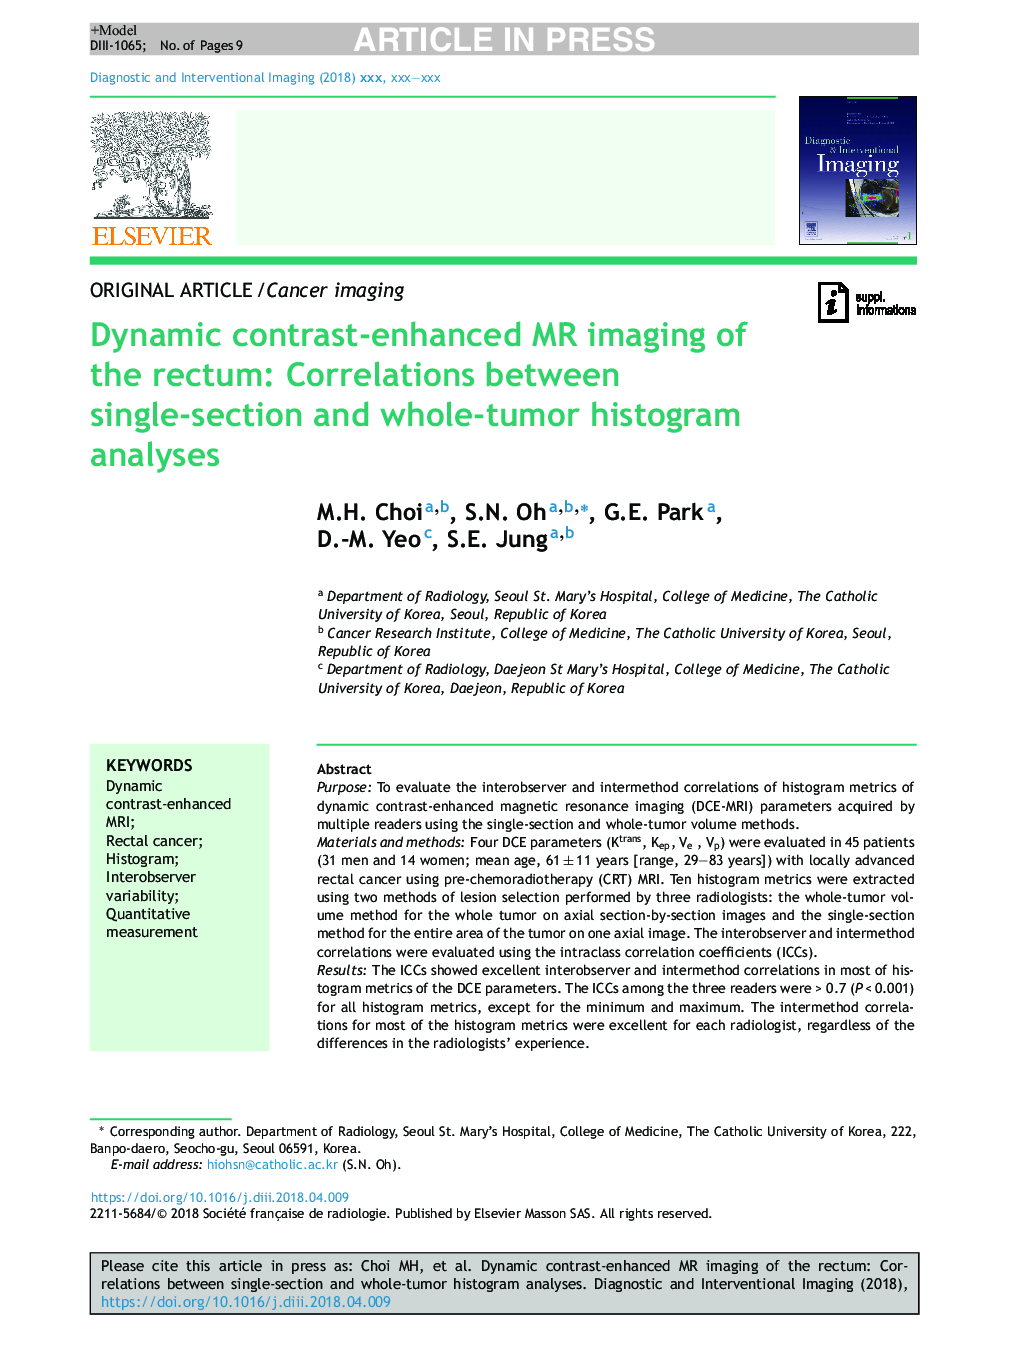 Dynamic contrast-enhanced MR imaging of the rectum: Correlations between single-section and whole-tumor histogram analyses